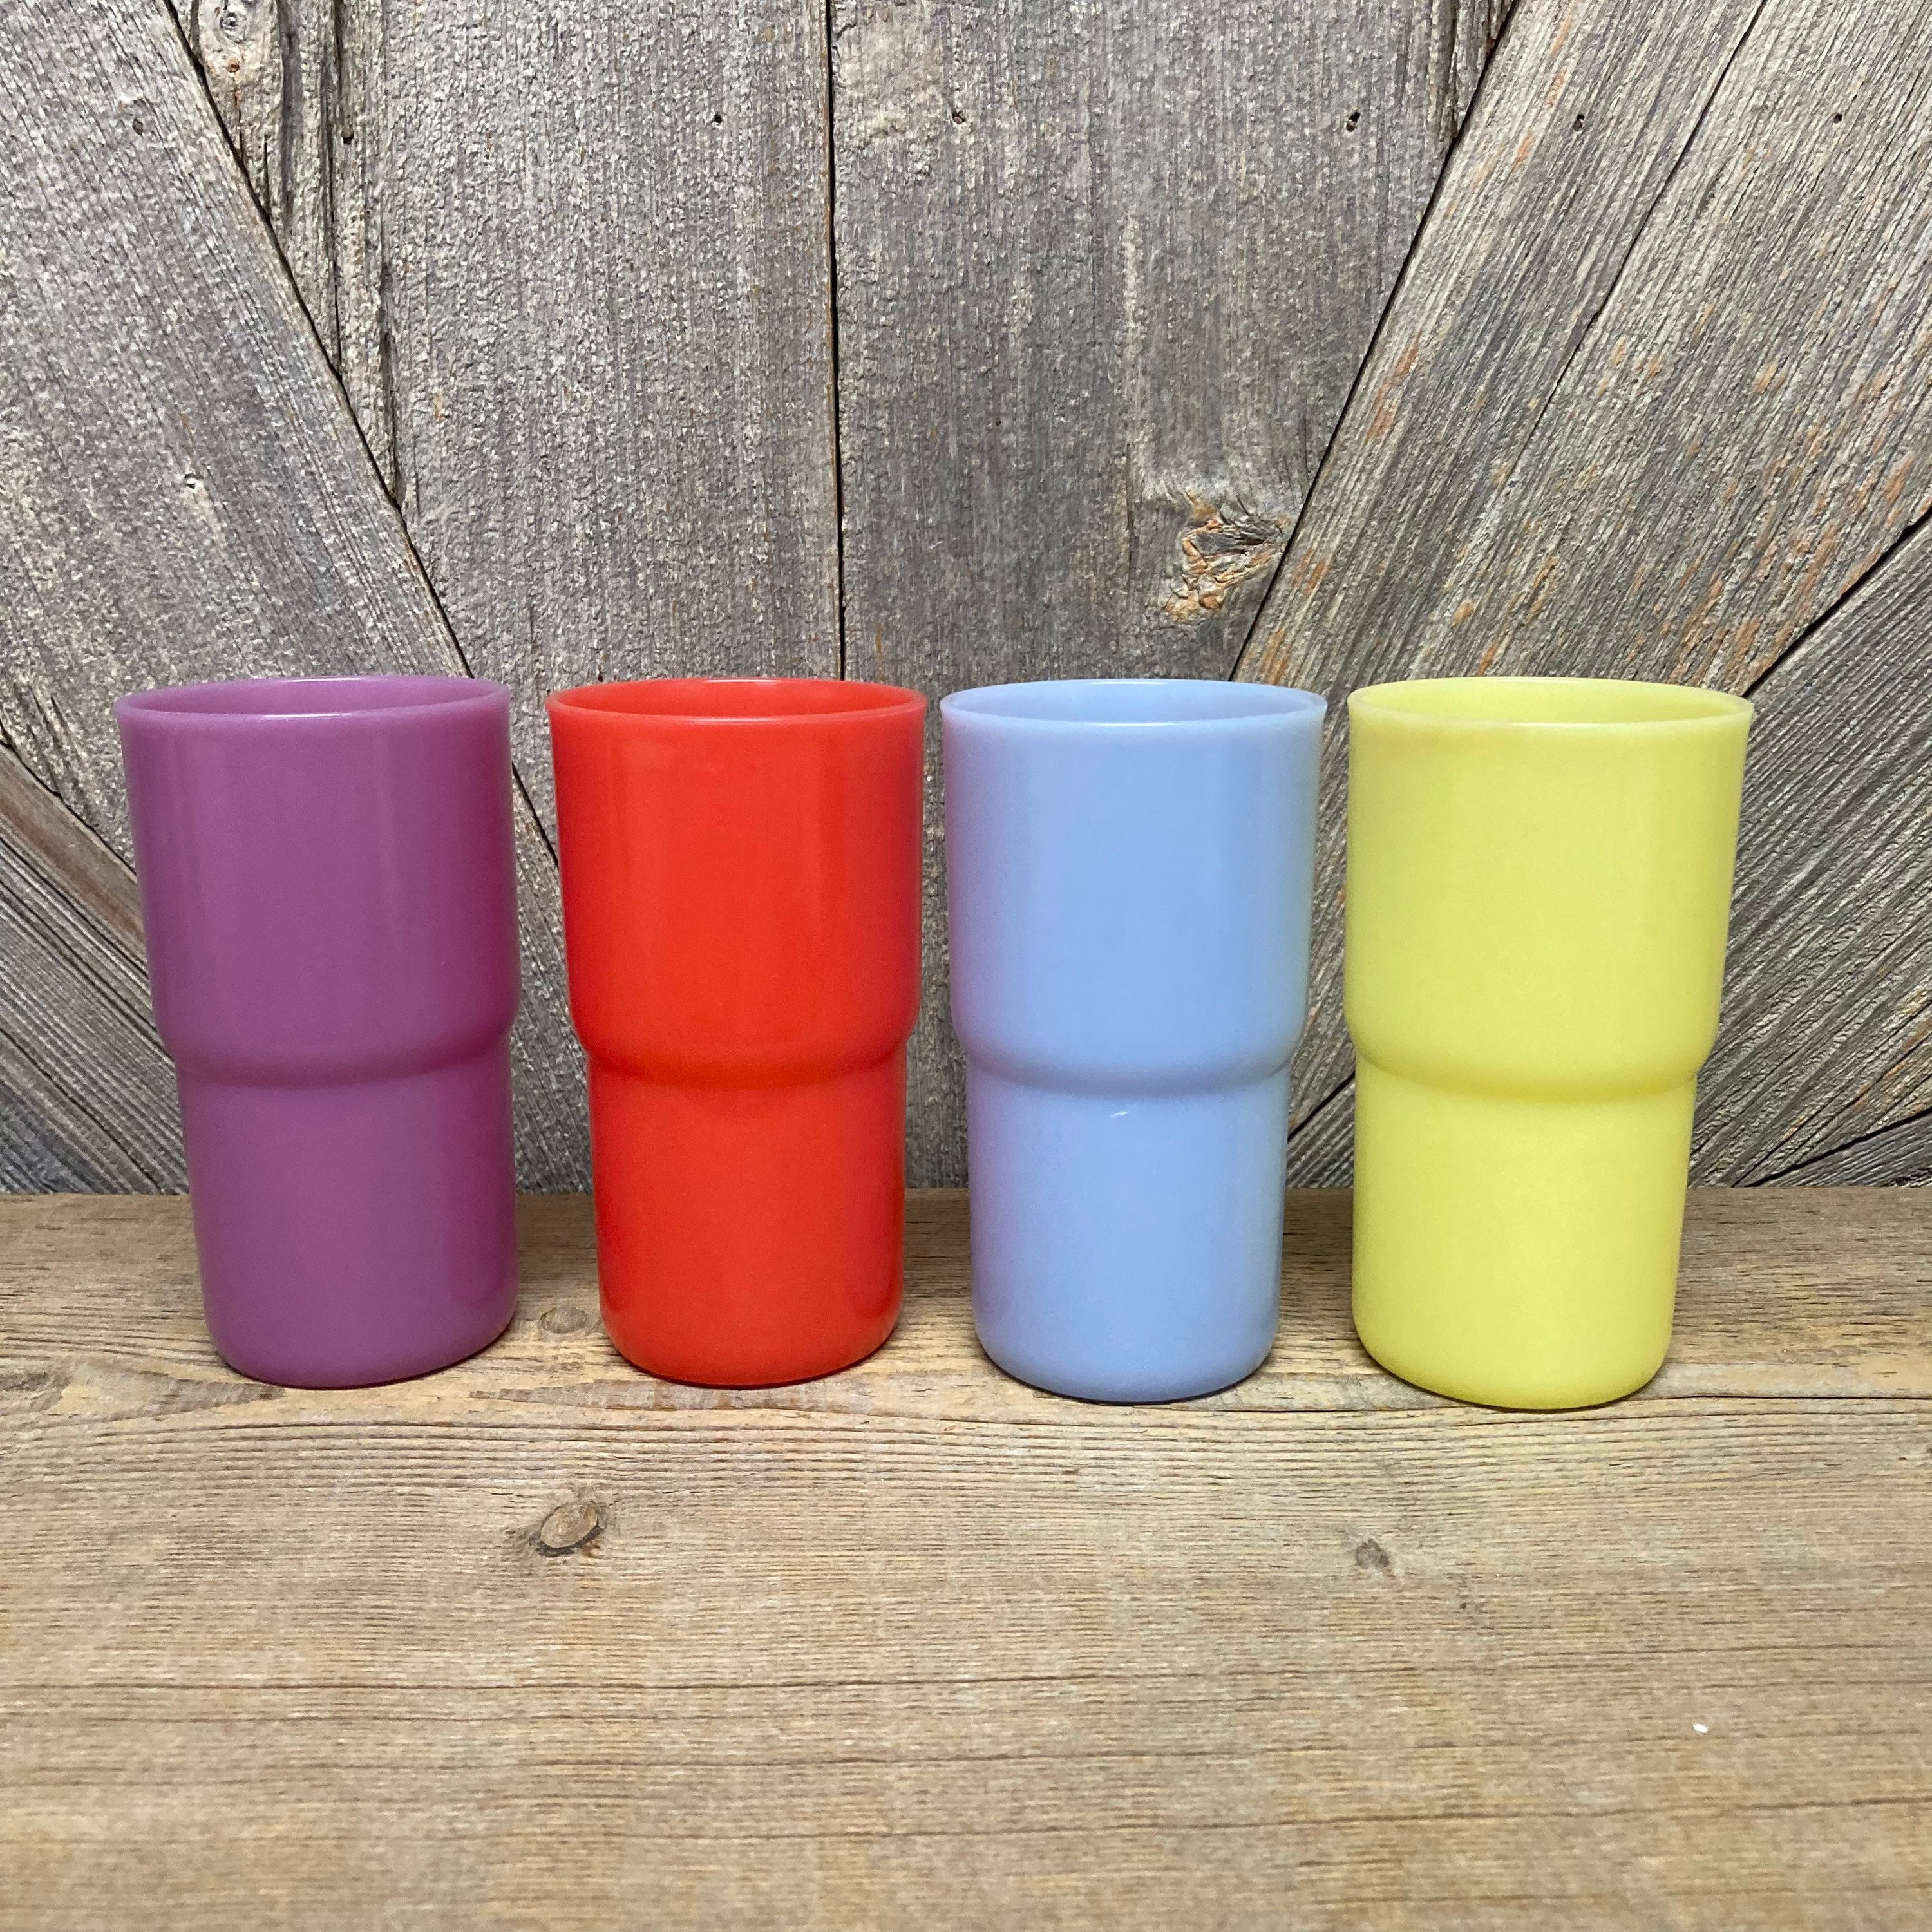 6 Vintage Pastel Colored Tupperware Small Beakers with Lids from the  Millionaire Line, Six Retro Colorful Drinks Tumblers made in France